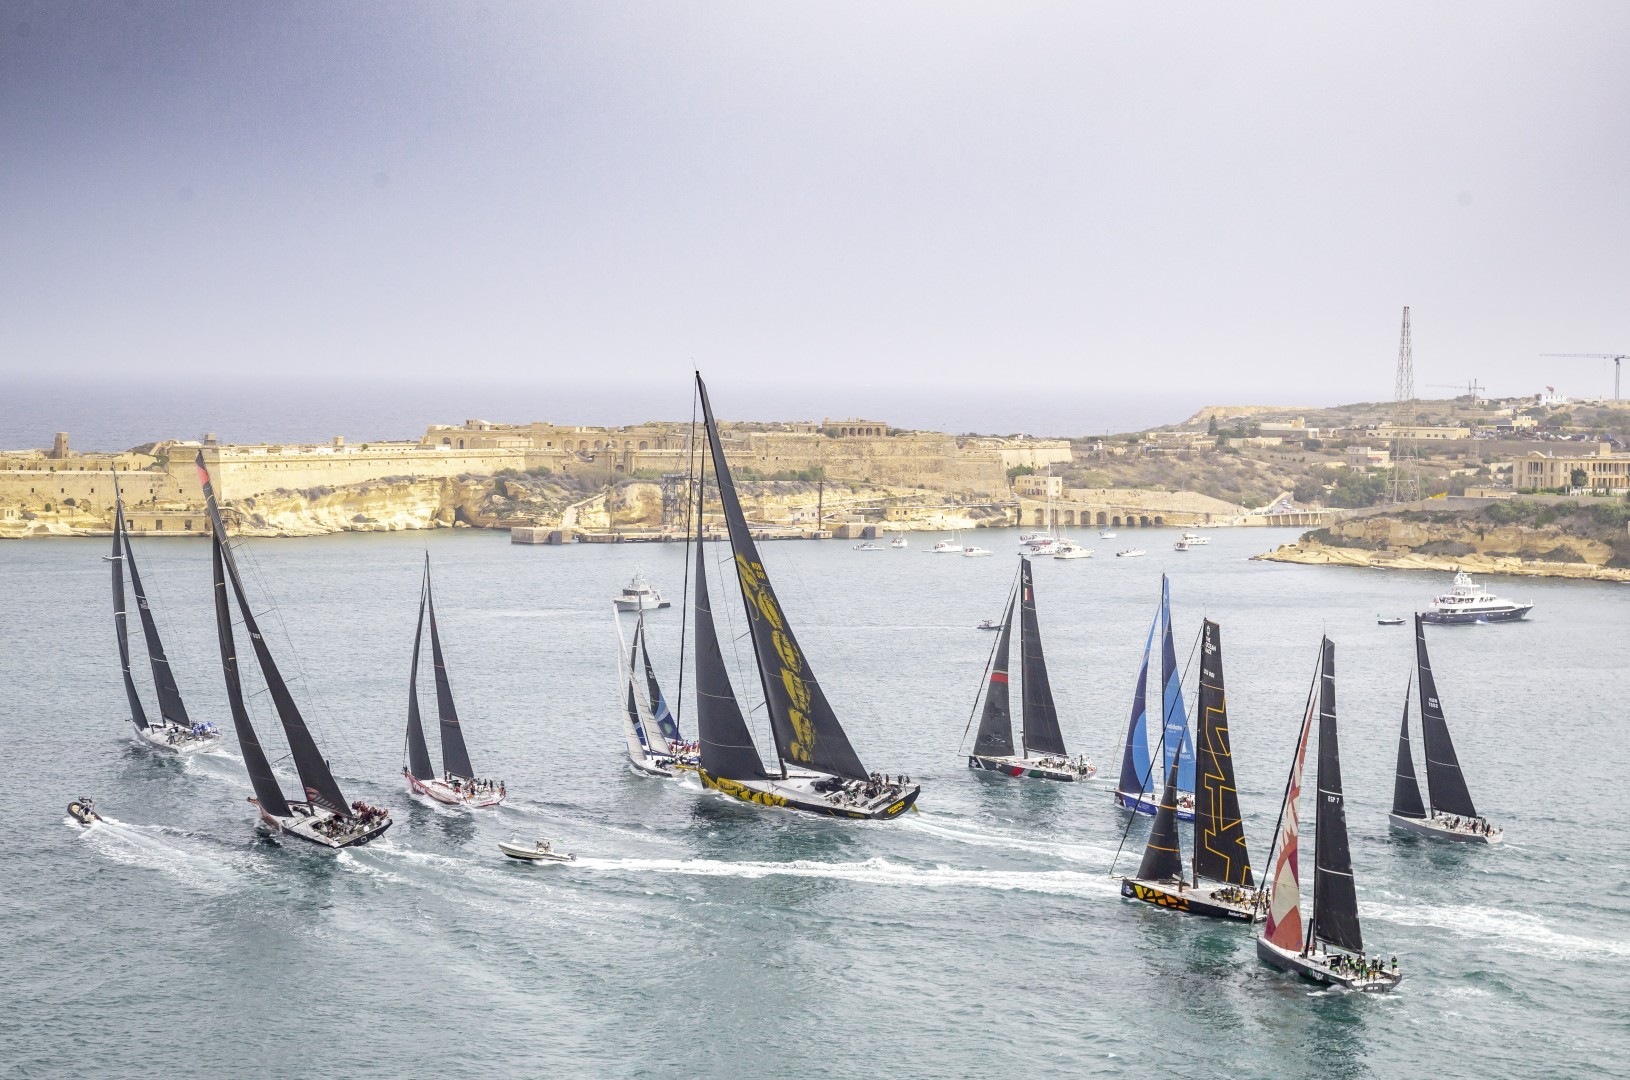 Registration open for the 2022 Rolex Middle Sea Race